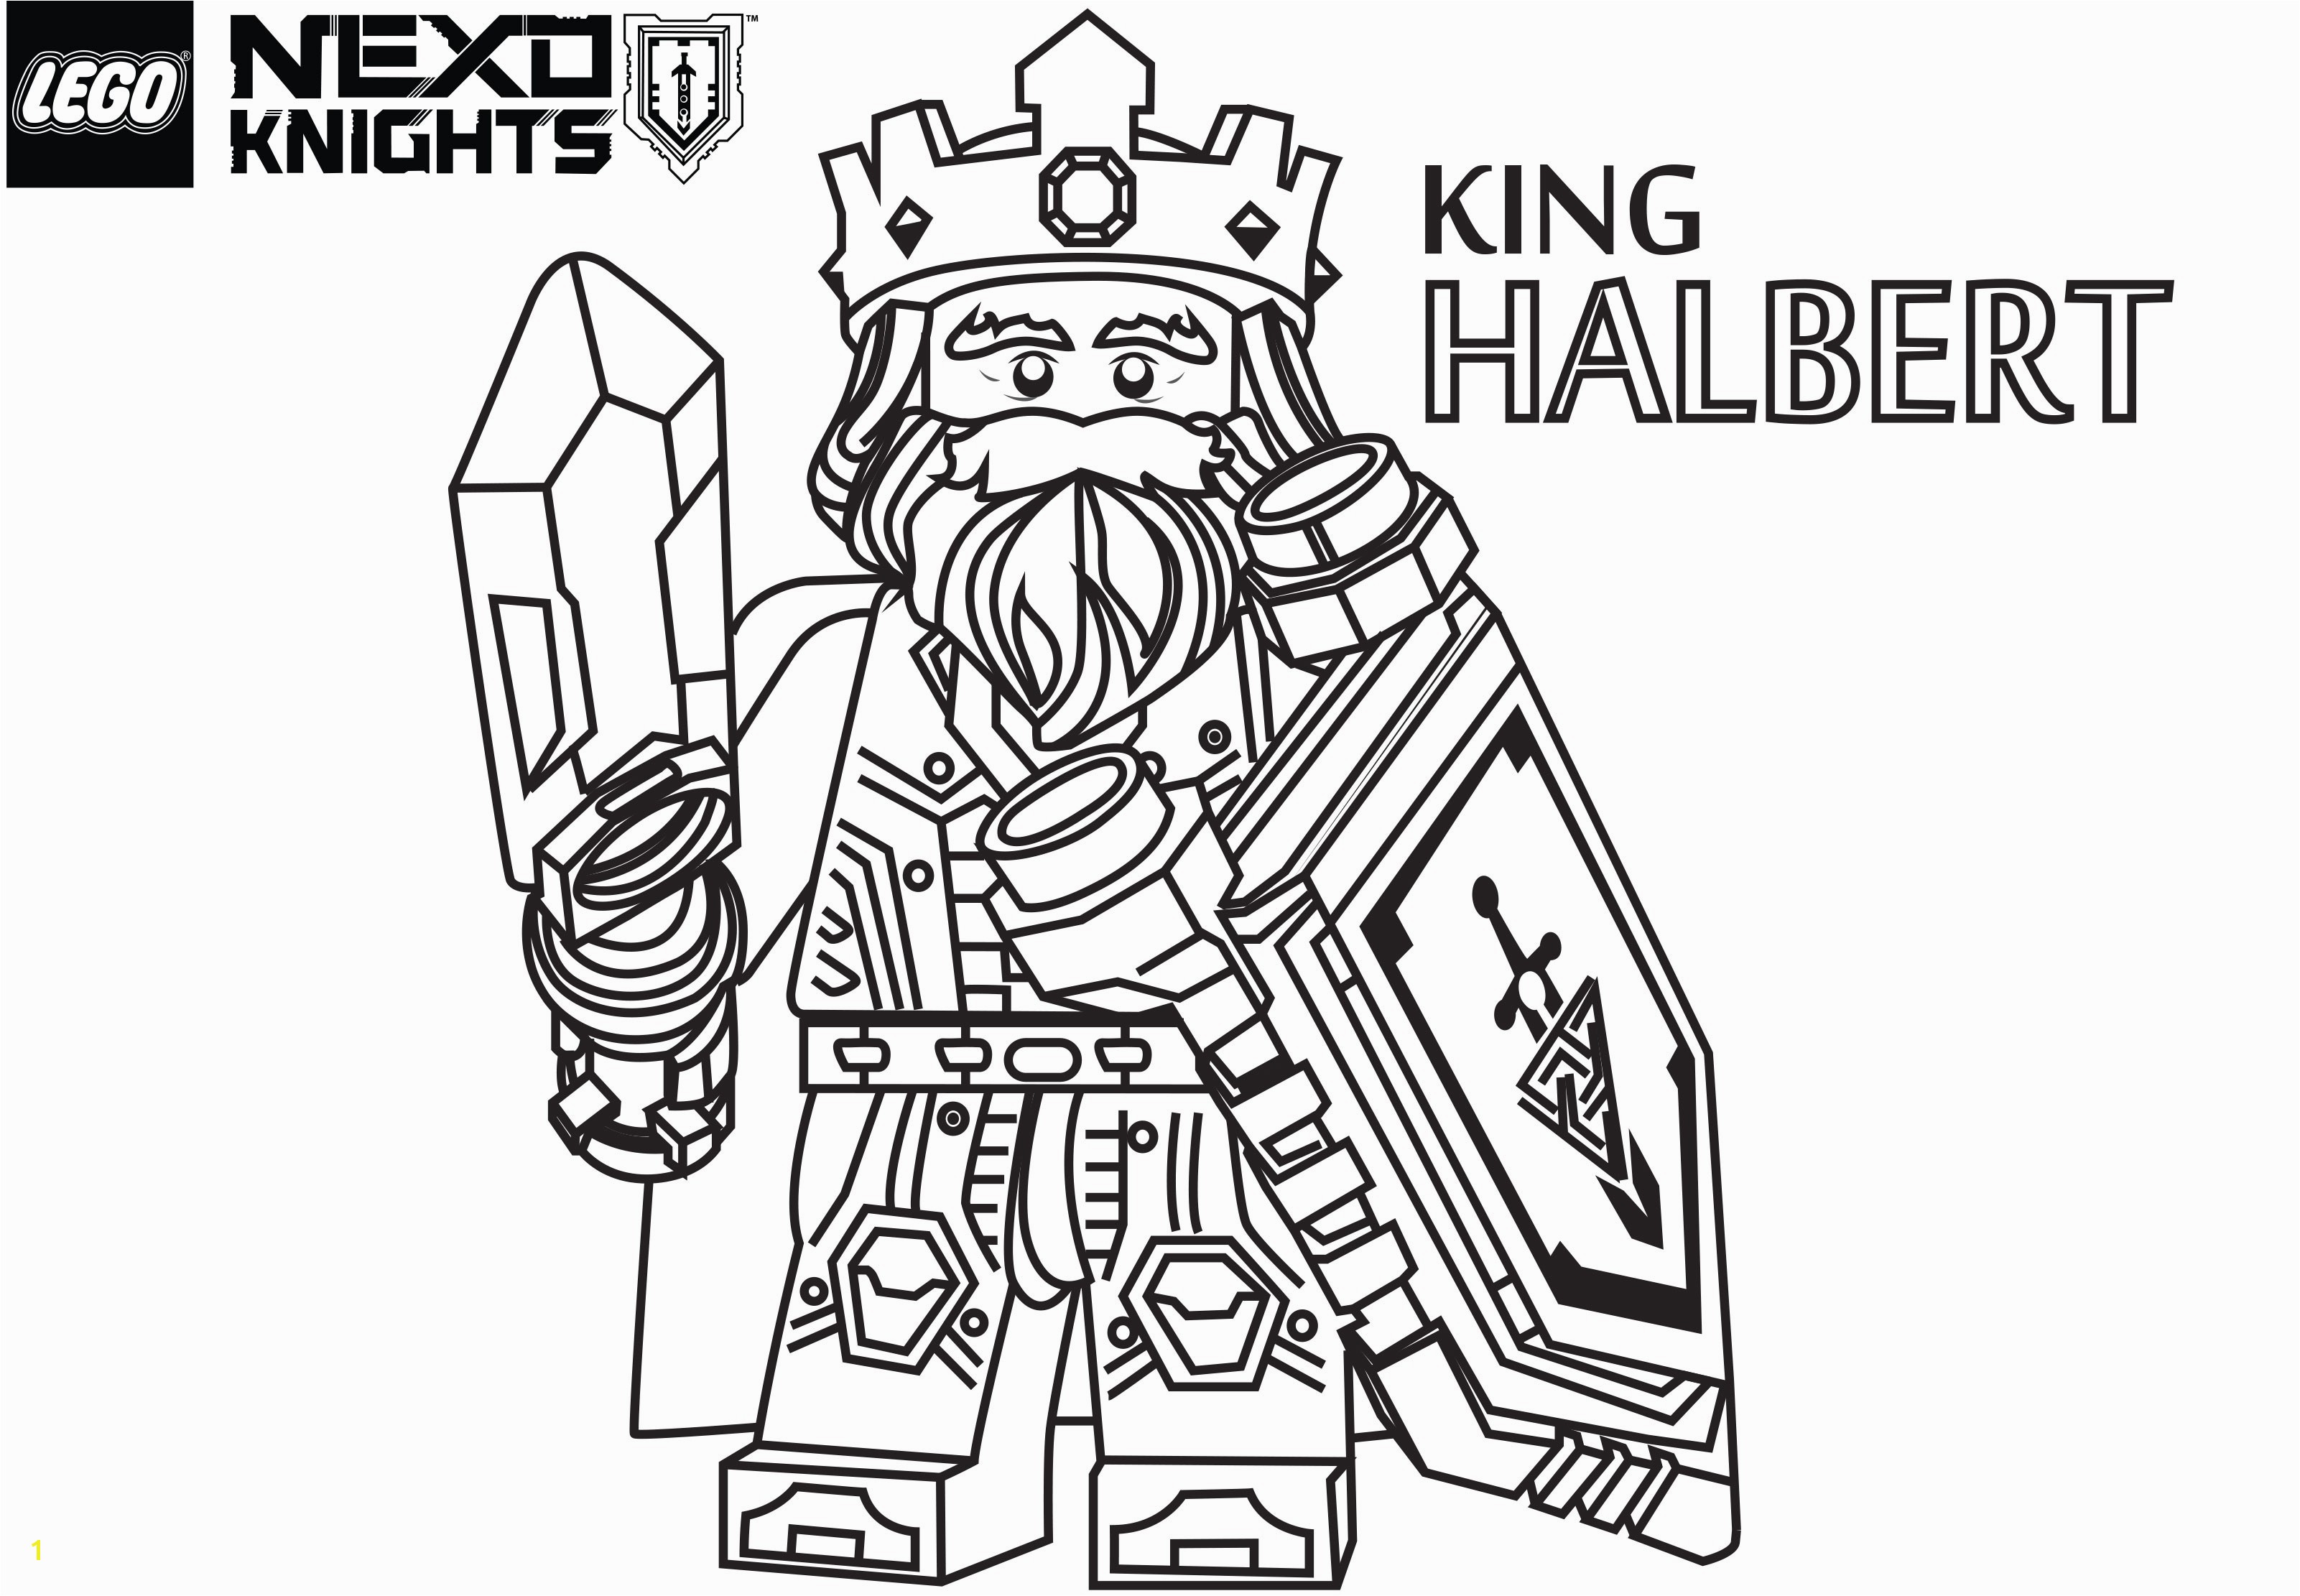 Lego Nexo Knights Coloring Pages to Print Printable Lego Knights Coloring Pages Kids Coloring Europe Travel